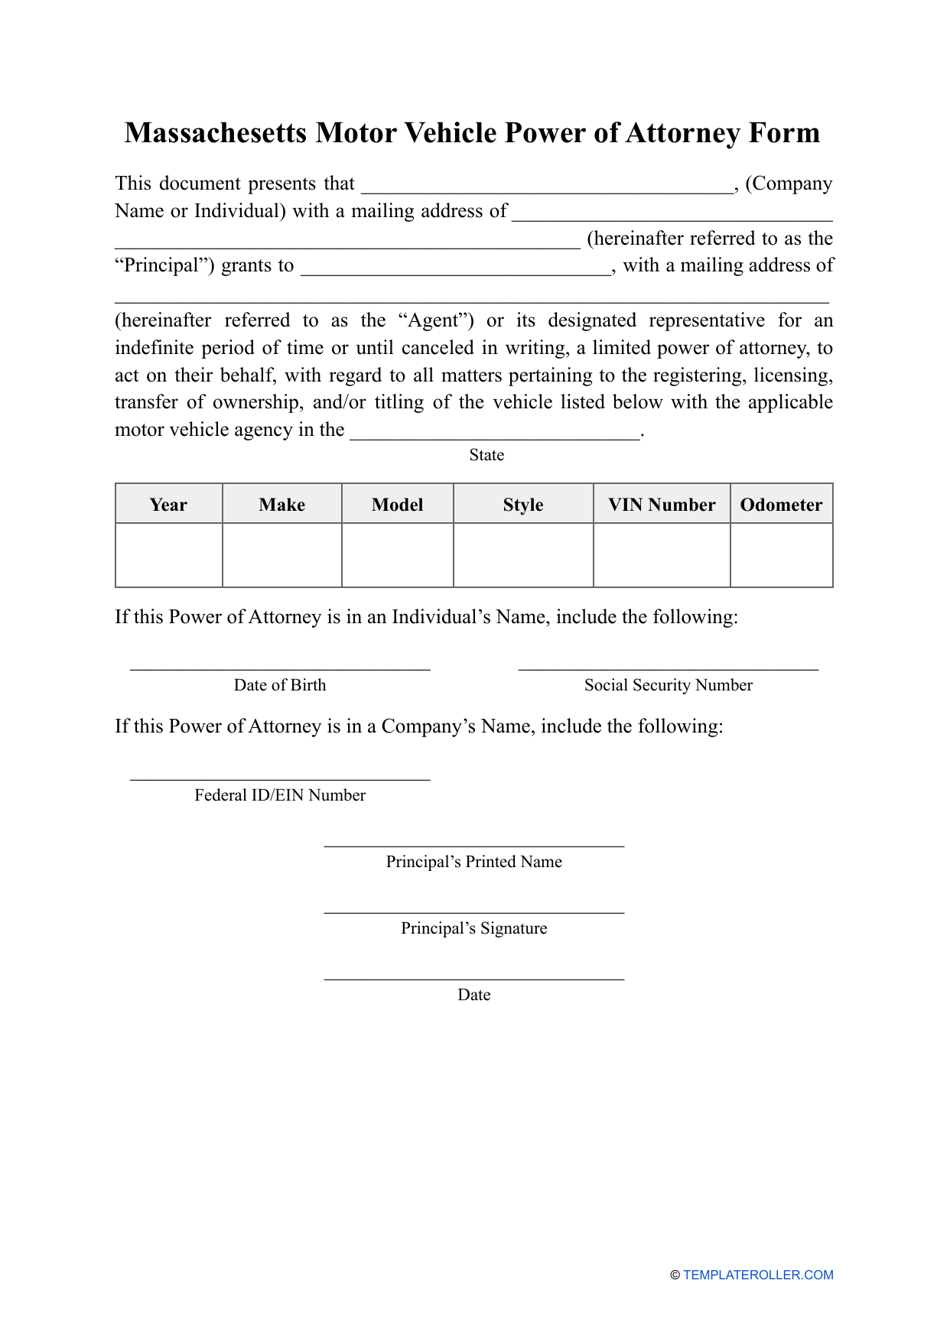 Motor Vehicle Power of Attorney Form - Massachusetts, Page 1